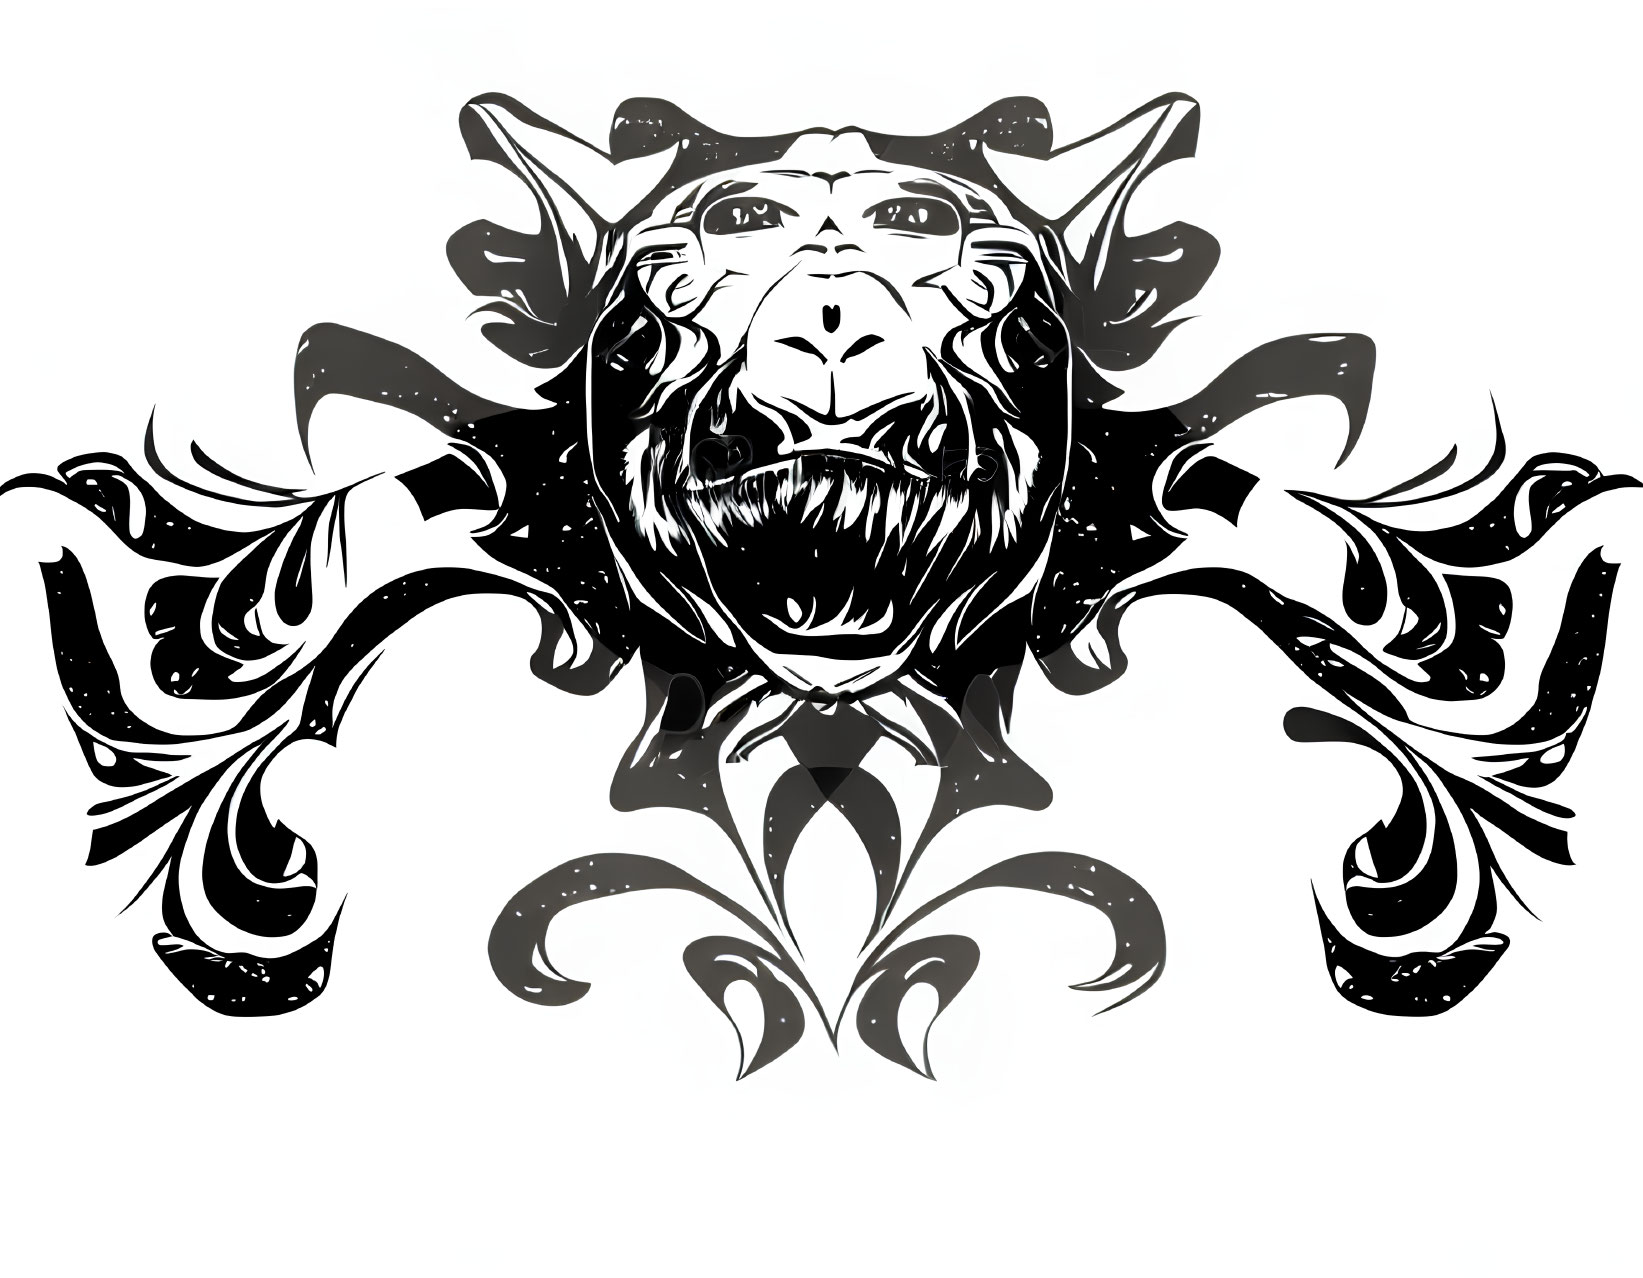 Symmetrical black and white lion head with tribal patterns